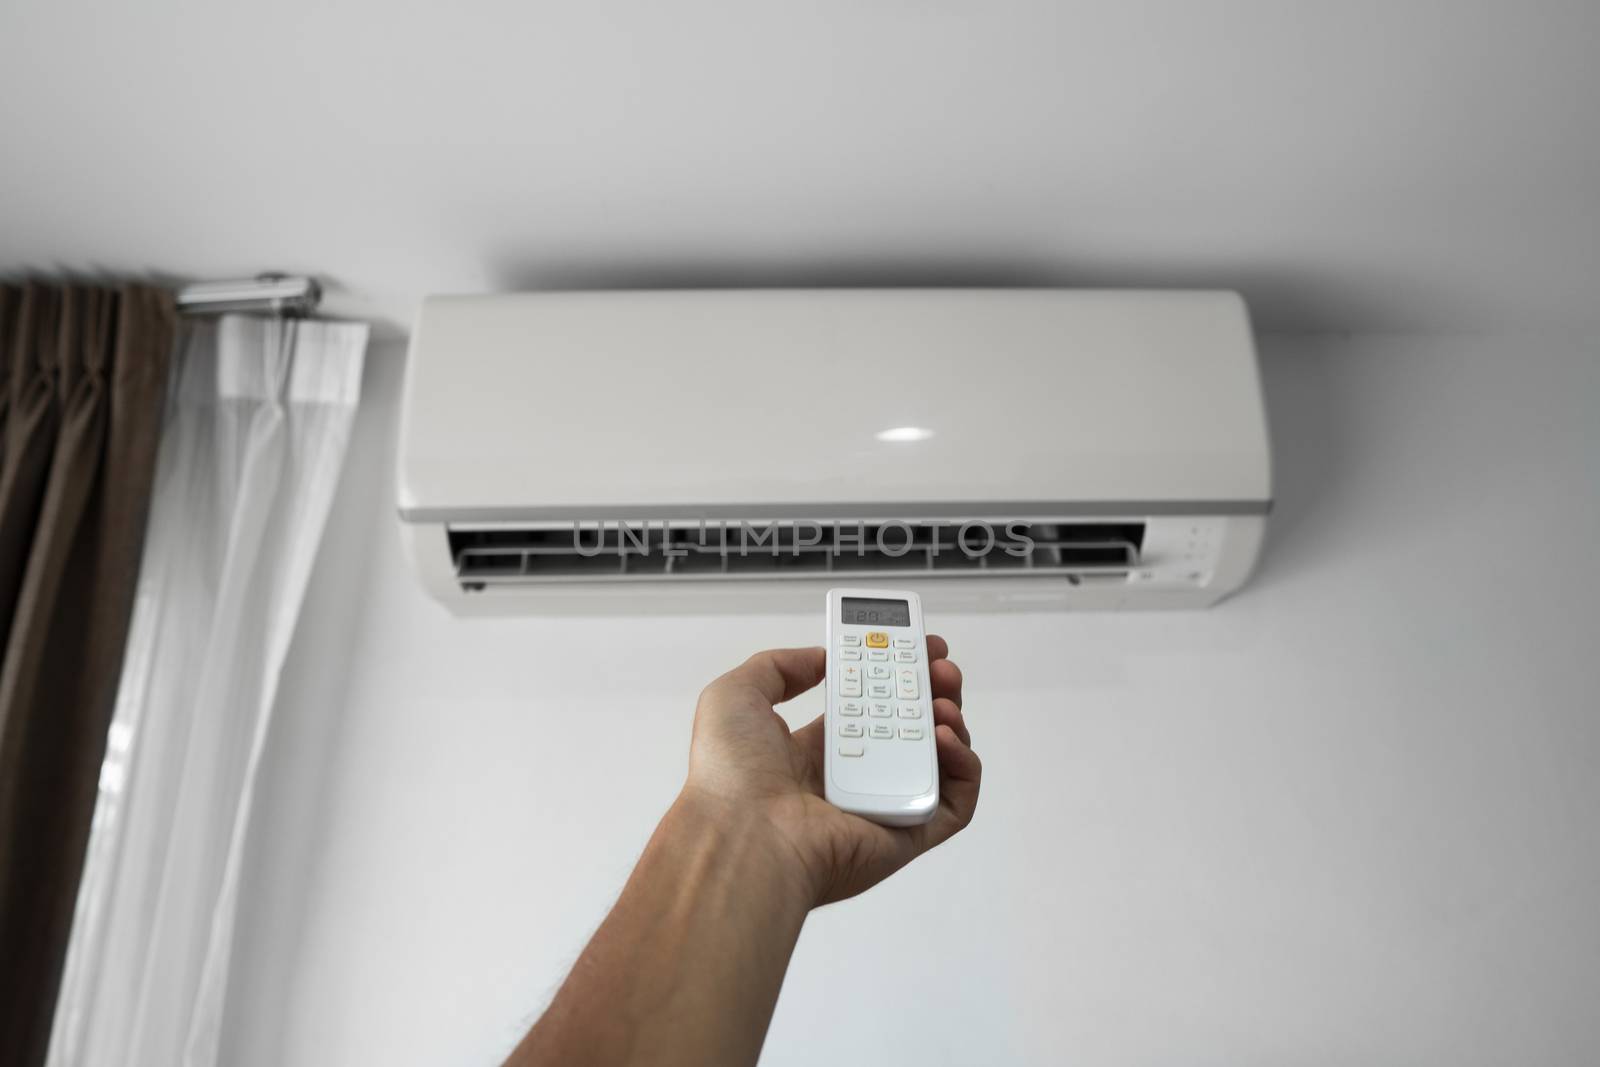 Man's hand using remote controler. Hand holding rc and adjusting temperature of air conditioner mounted on a white wall. Indooor comfort temperature. Health concepts and energy savings